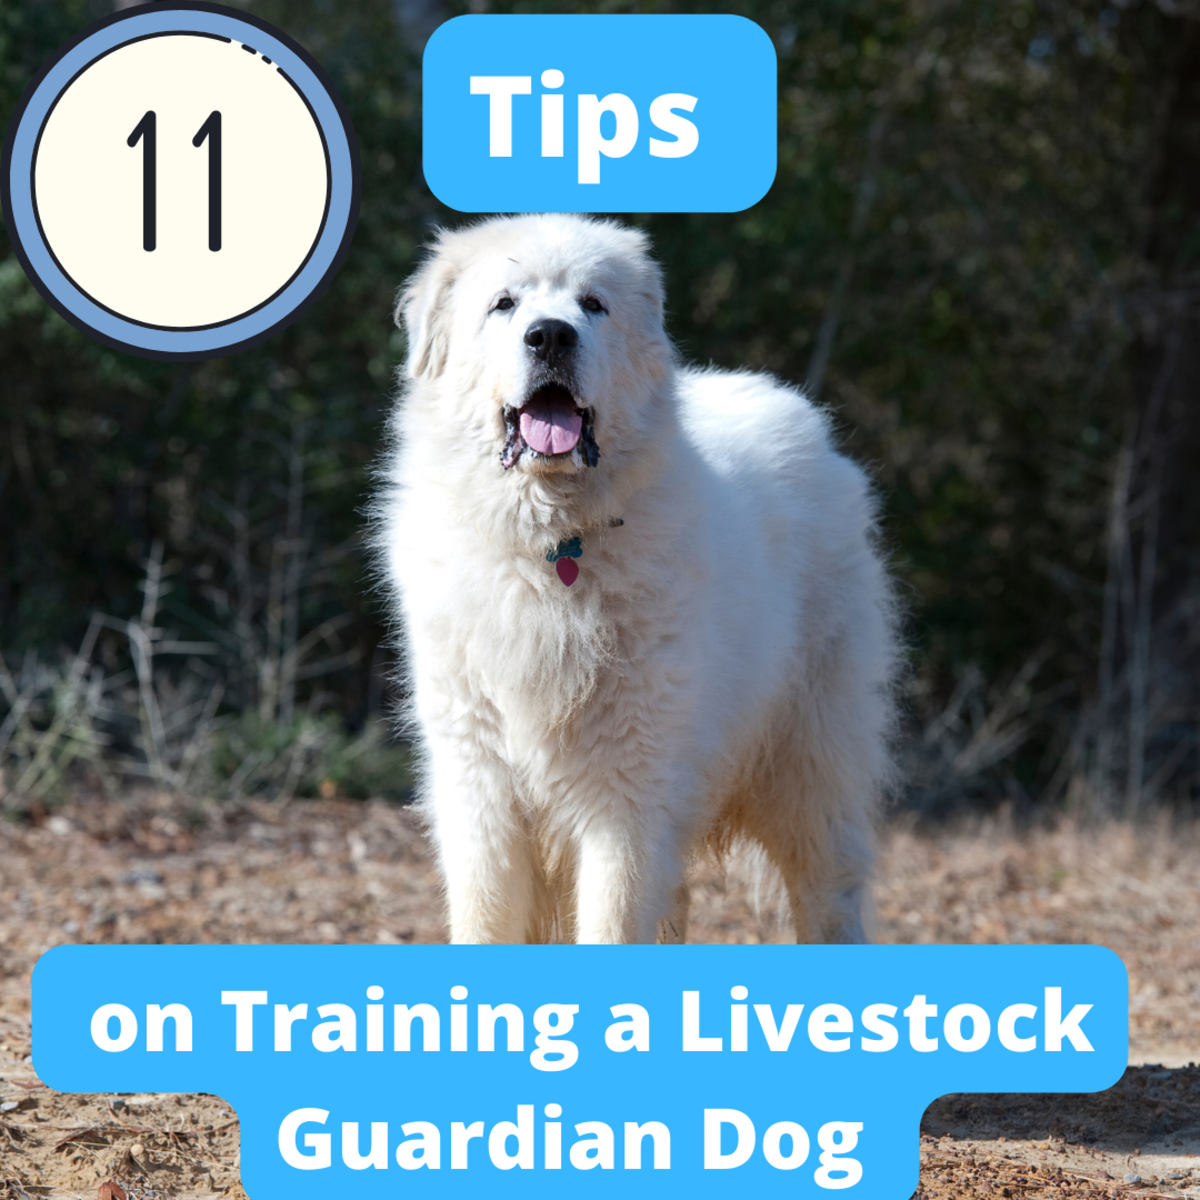 tips-for-training-livestock-guardian-dogs